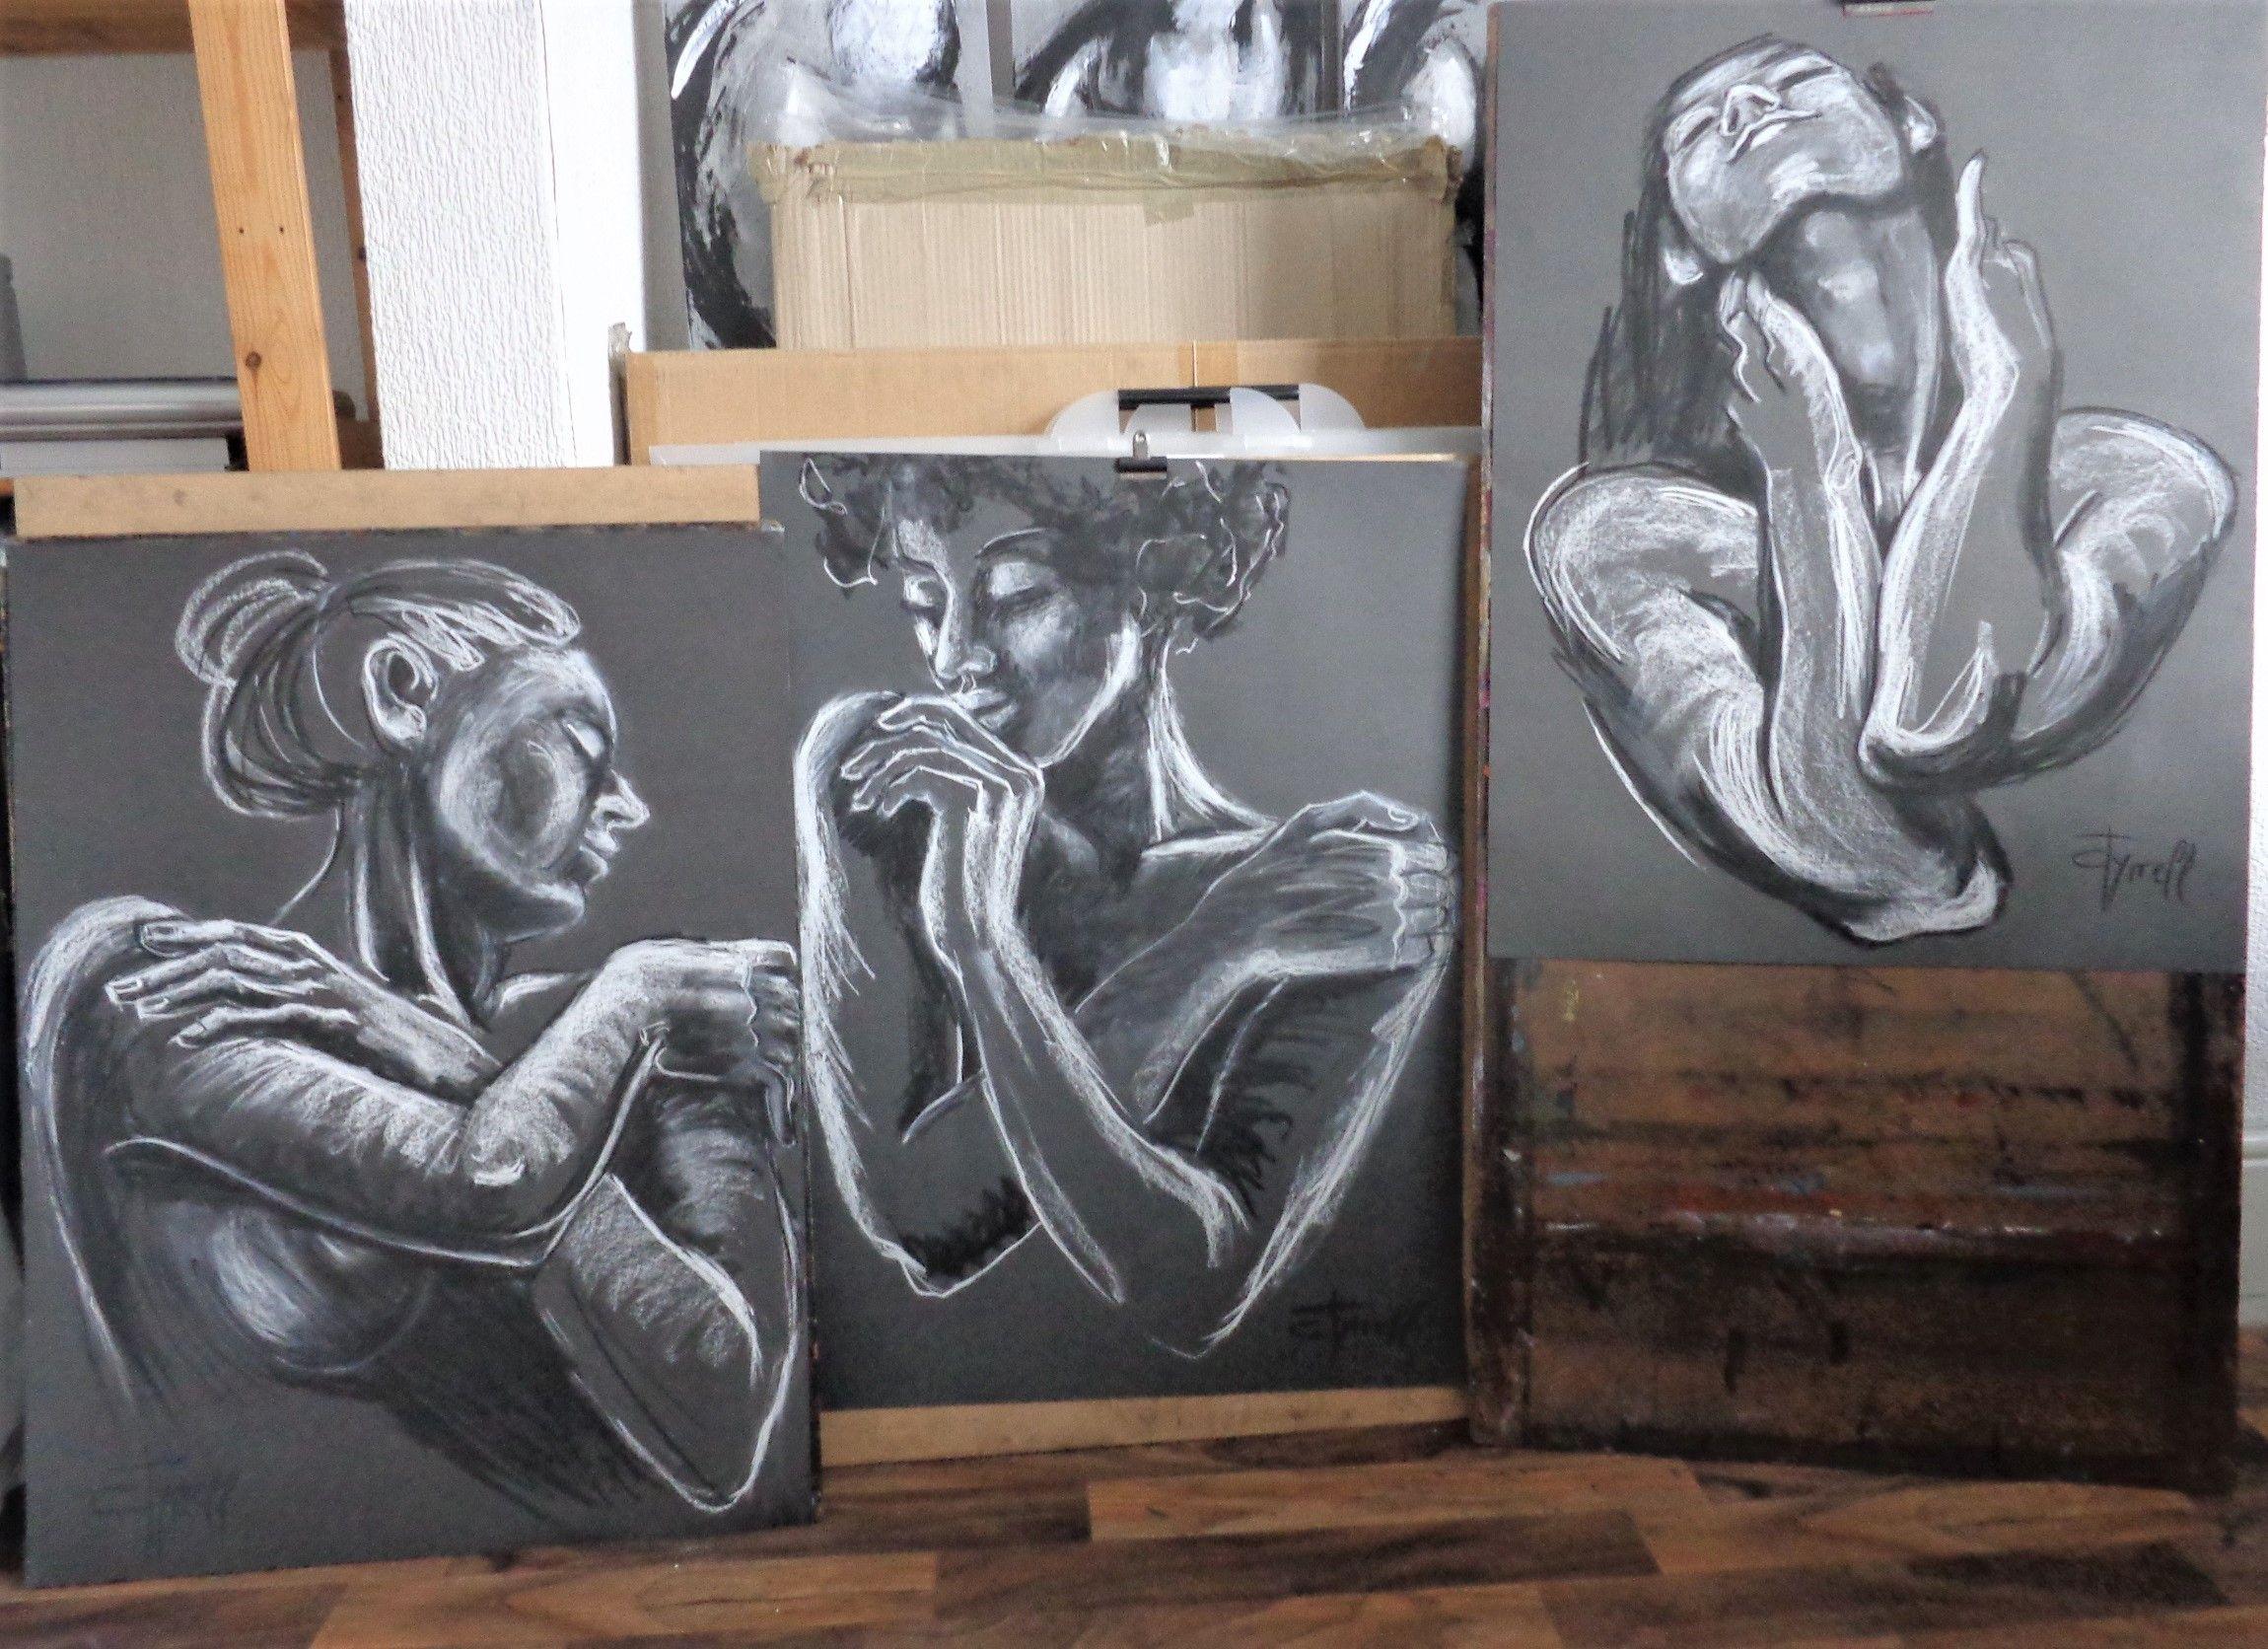 Original contemporary figurative charcoal and white pastel drawing on black paper, unframed. New series of monochrome modern and spontaneous portrait drawings of women expressing feelings and moods. Image of a romantic woman with crossed arms, moved